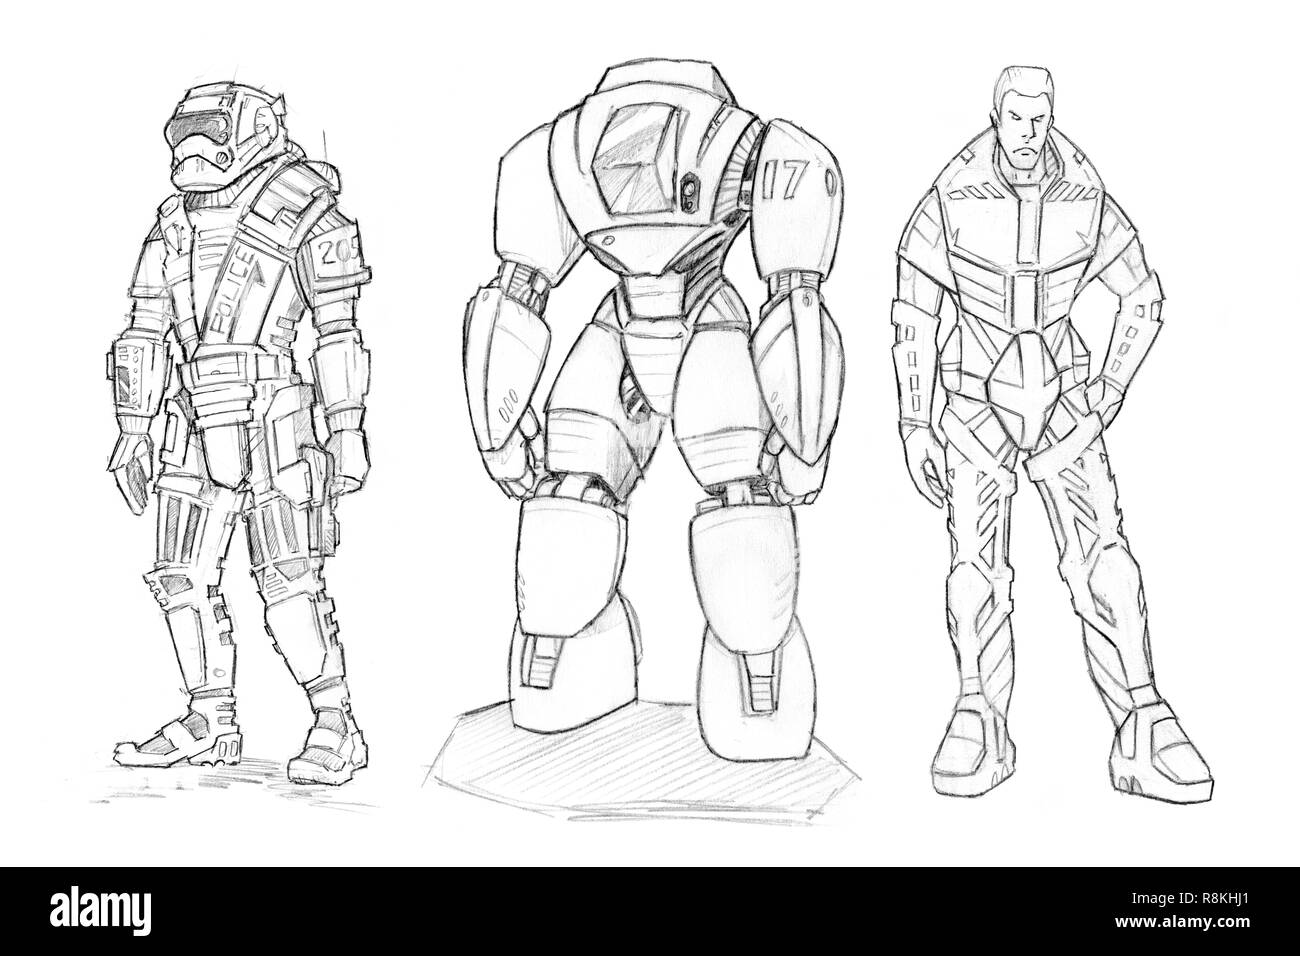 Set of Rough Pencil Drawings of Various Characters in Sci-fi Suit Stock Photo